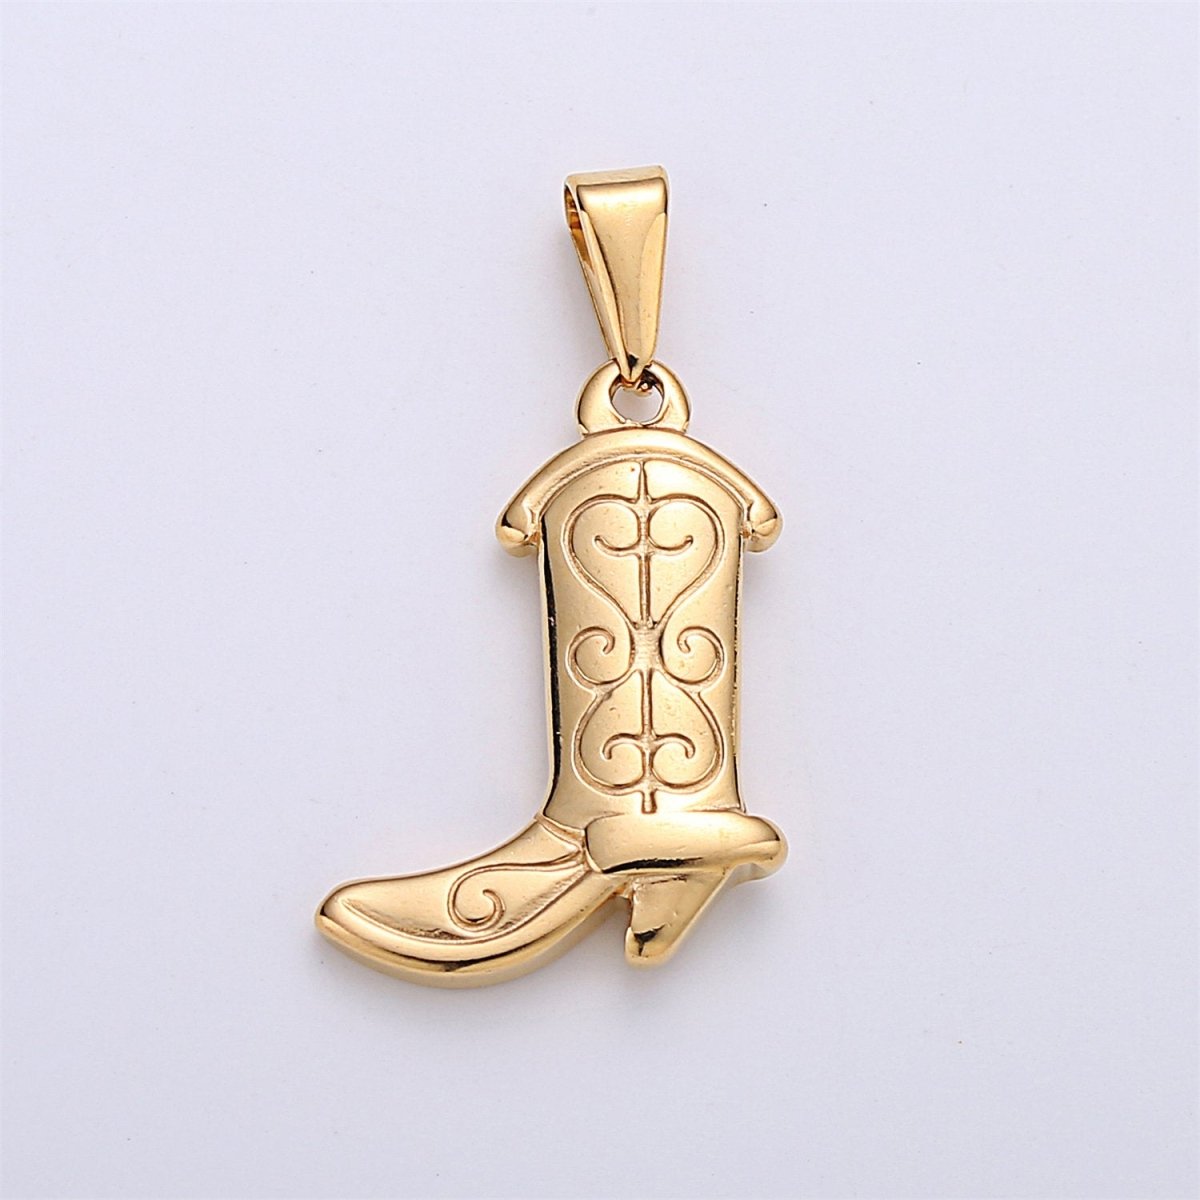 Gold Filled Cowgirl Boots Charms- Cowgirl Party Pendant- Silver Cowboy Boot Charm Cowgirl Boots Pendant for Necklace Bracelet J-657 J-662 - DLUXCA